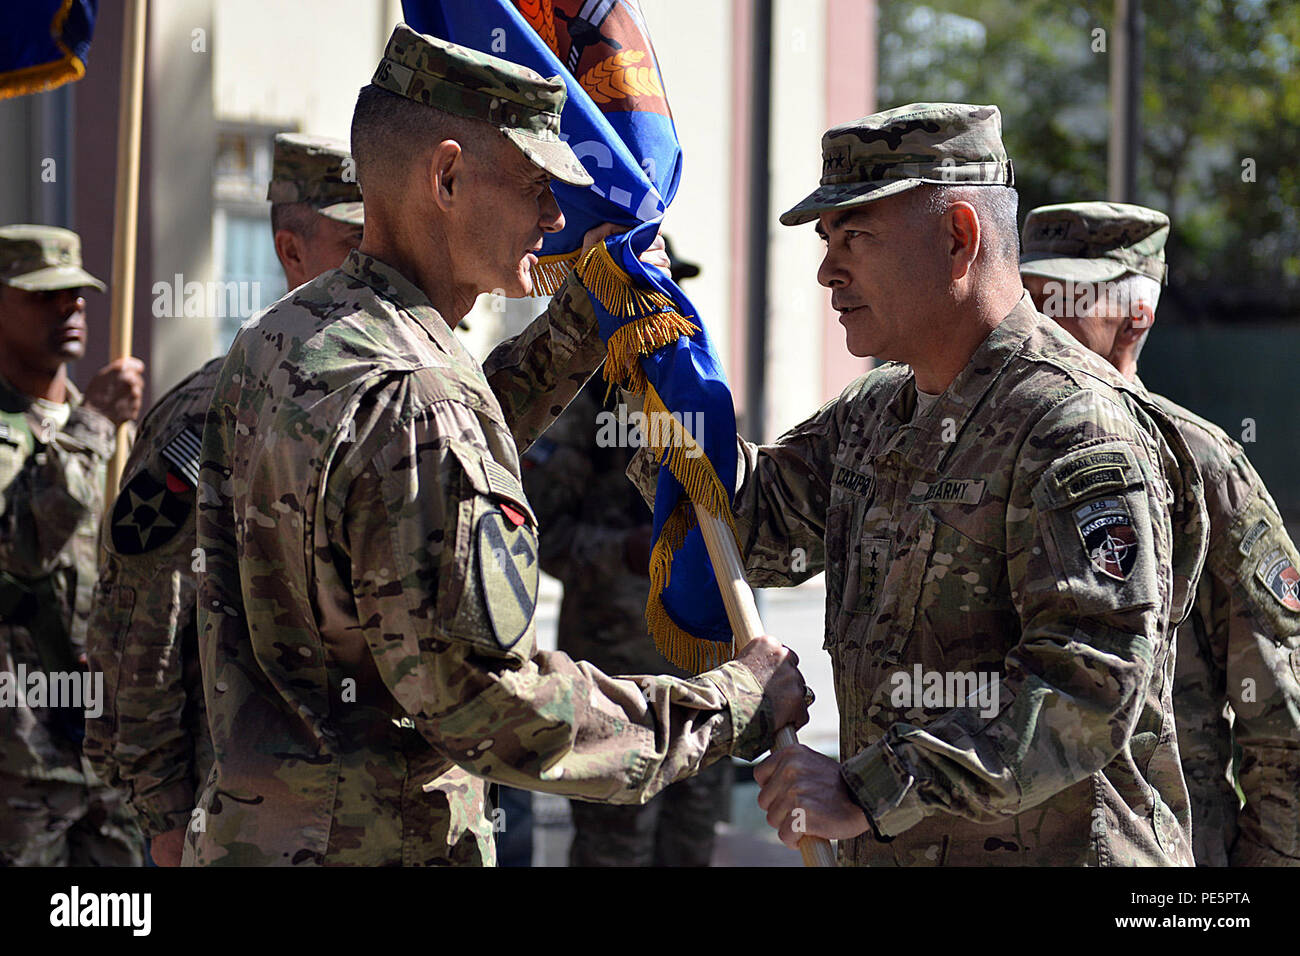 At a ceremony in Kabul, Afghanistan, Gen. John F. Campbell, commander, Resolute Support, passes the unit colors to Maj. Gen. Gordon 'Skip' Davis, in-coming commander, during the change of command for Combined Security Transition Command - Afghanistan on Oct. 1, 2015. Maj. Gen. Todd T. Simonite relinquished command.  The event was attended by an international audience representing NATO and coalition parter countries participating in the Resolute Support mission. (Military photo by Air Force Tech. Sgt. Robert Sizelove) Stock Photo